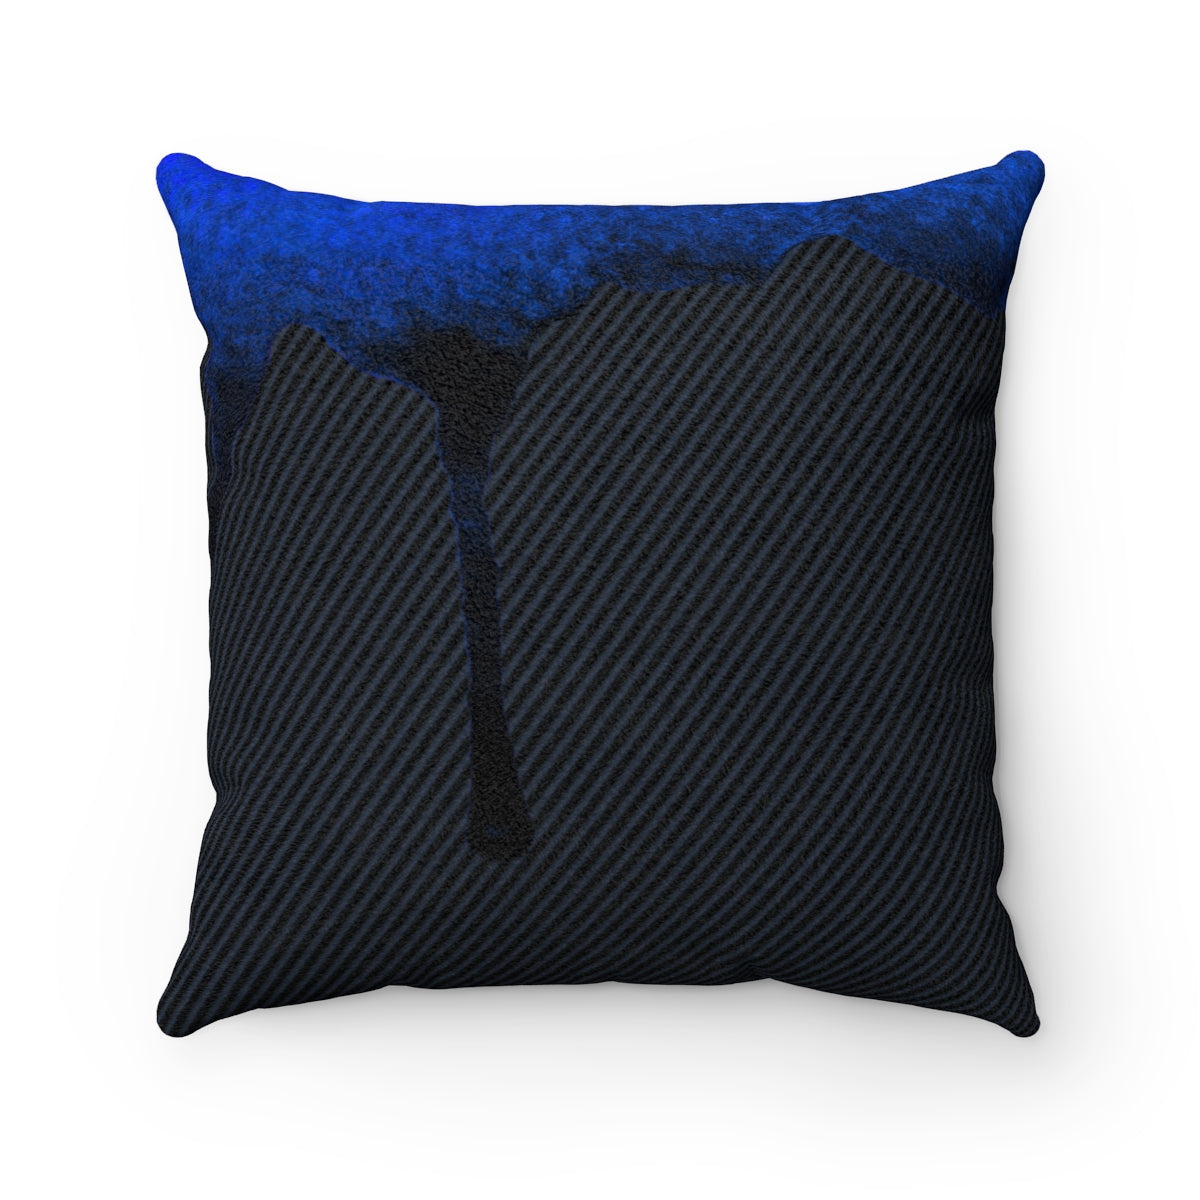 Dripped Night Sky Faux Suede Square Pillow from Vluxe by Lucky Nahum